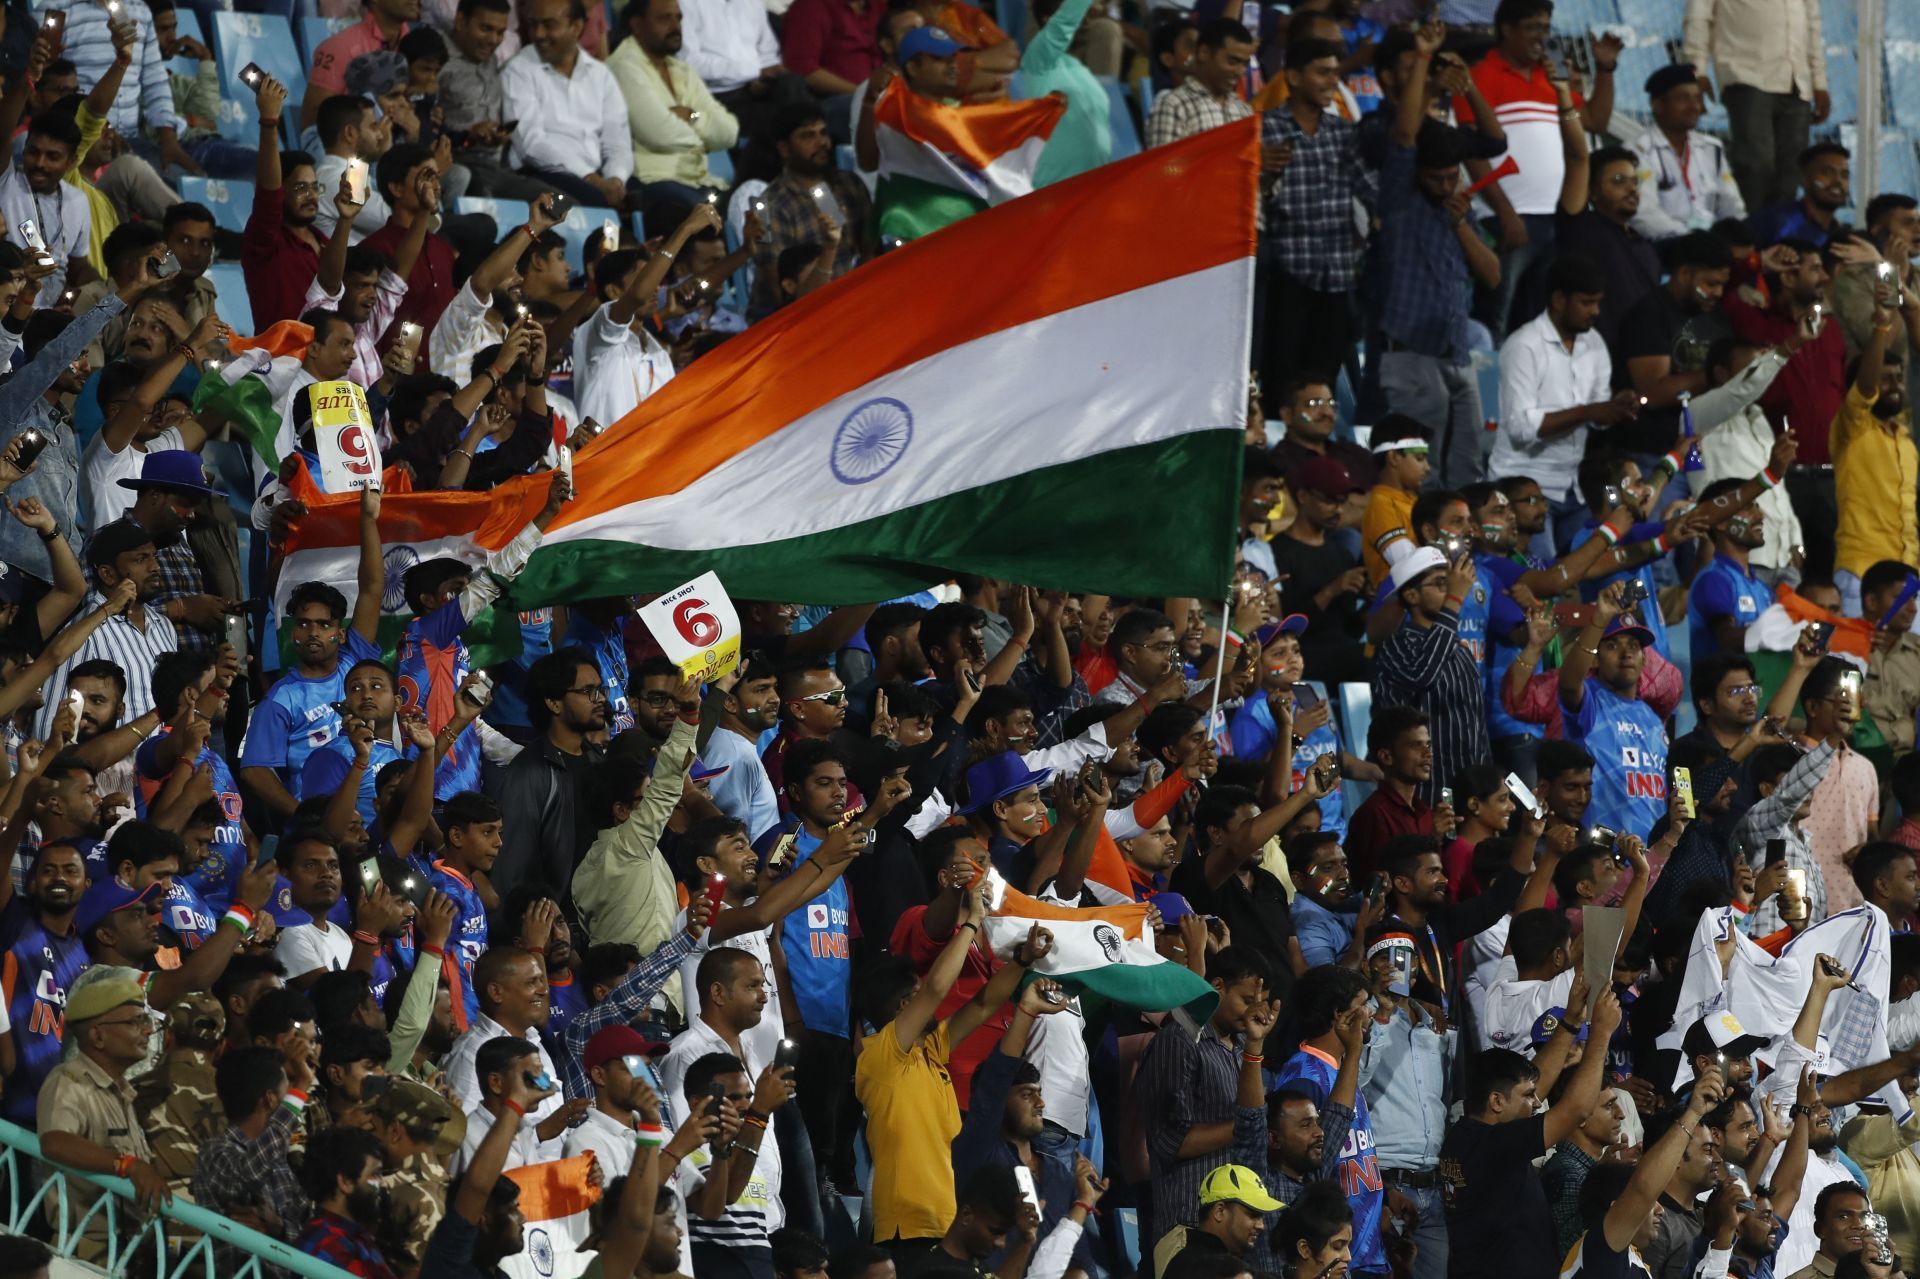 1st One Day International: India v South Africa